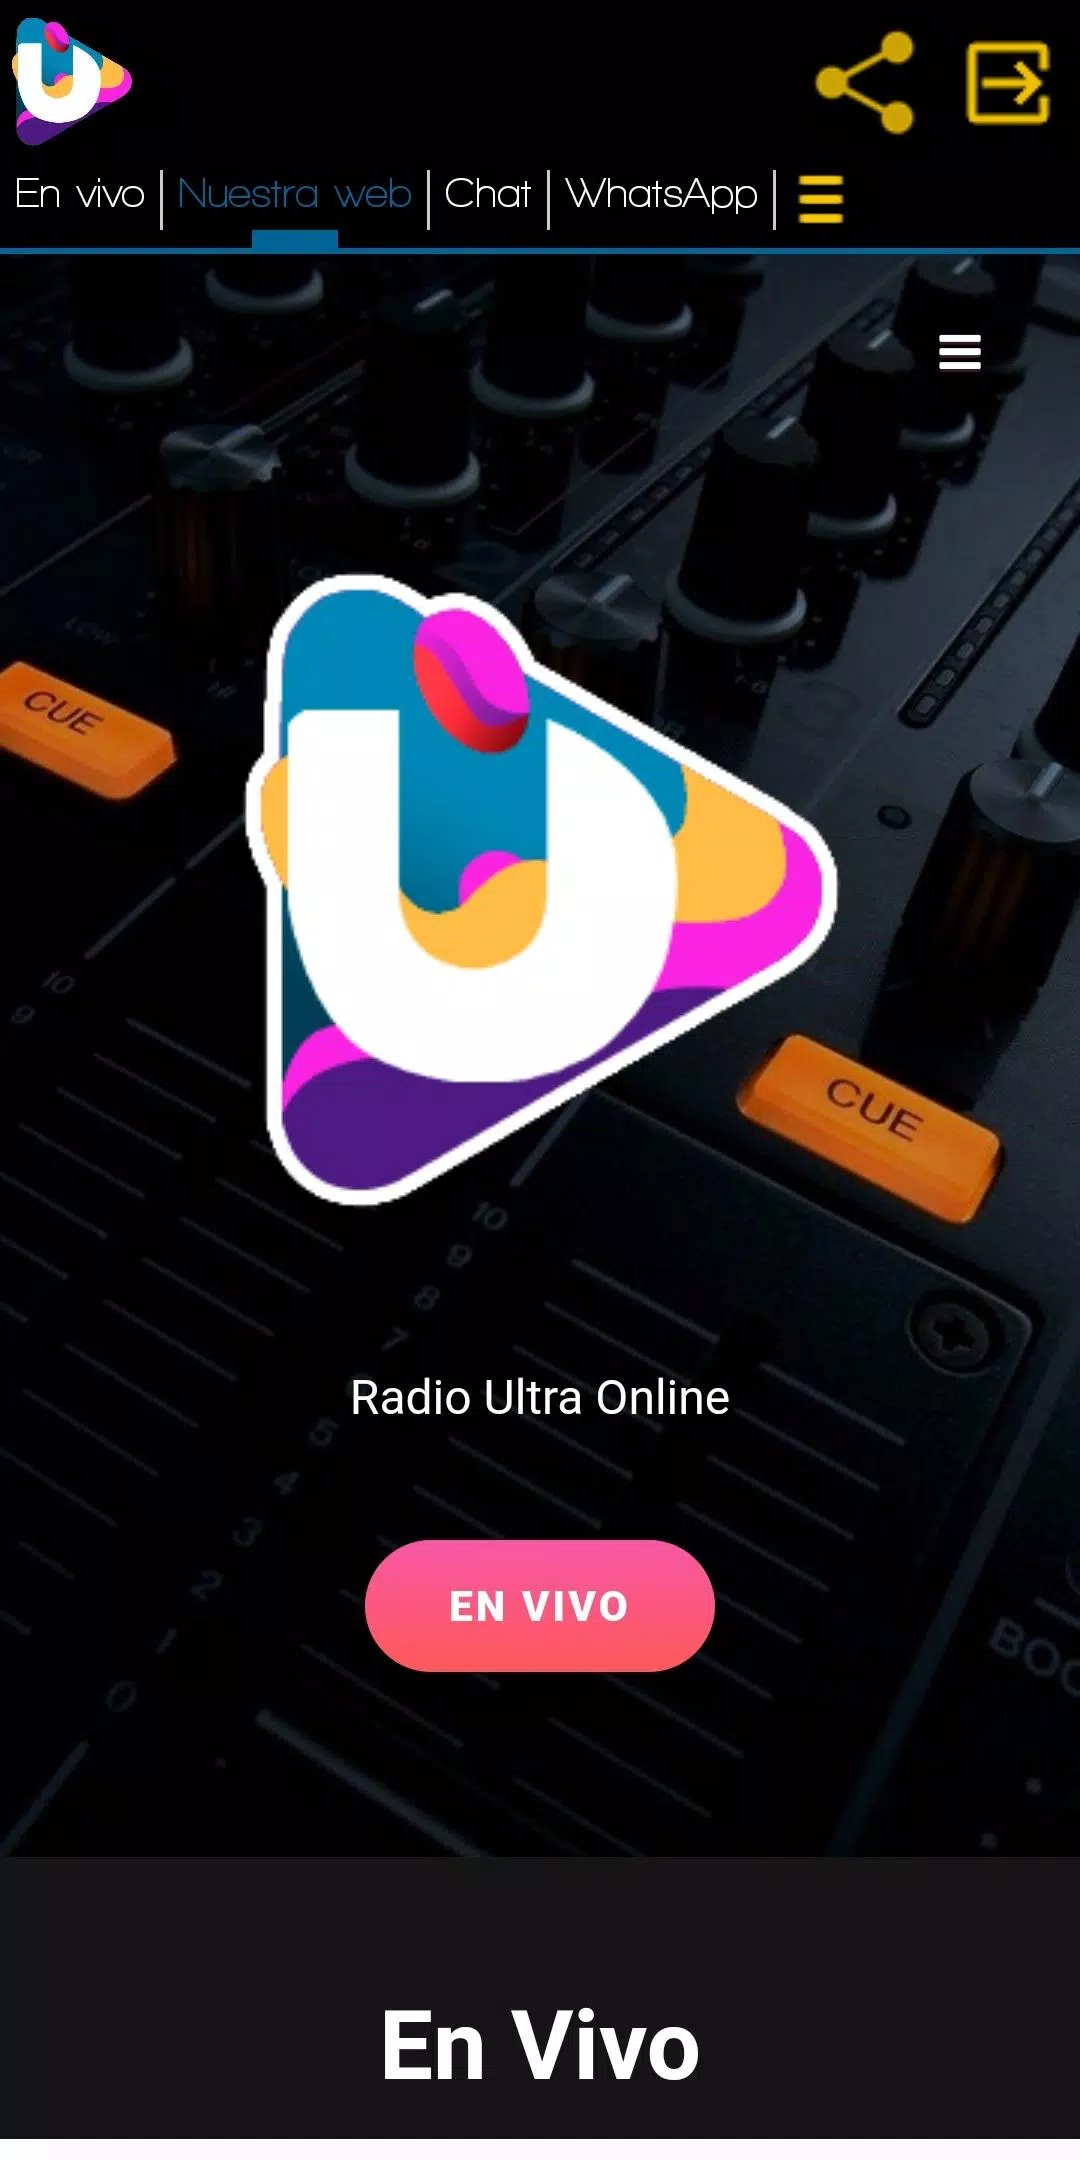 Radio Ultra Online for Android - APK Download